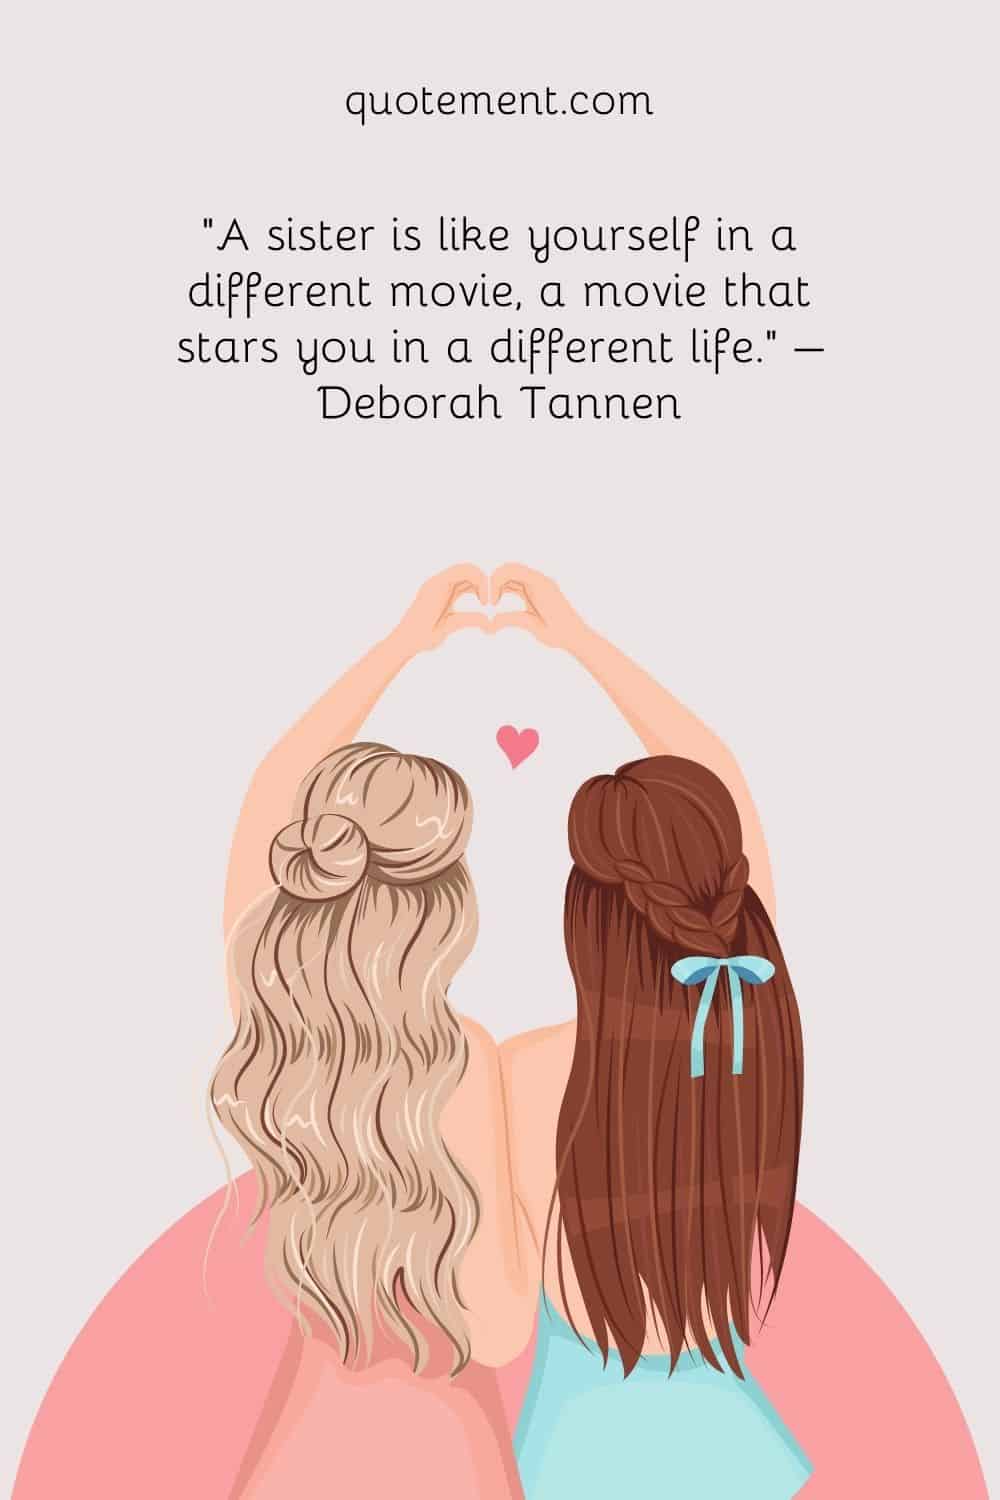 A sister is like yourself in a different movie, a movie that stars you in a different life. – Deborah Tannen